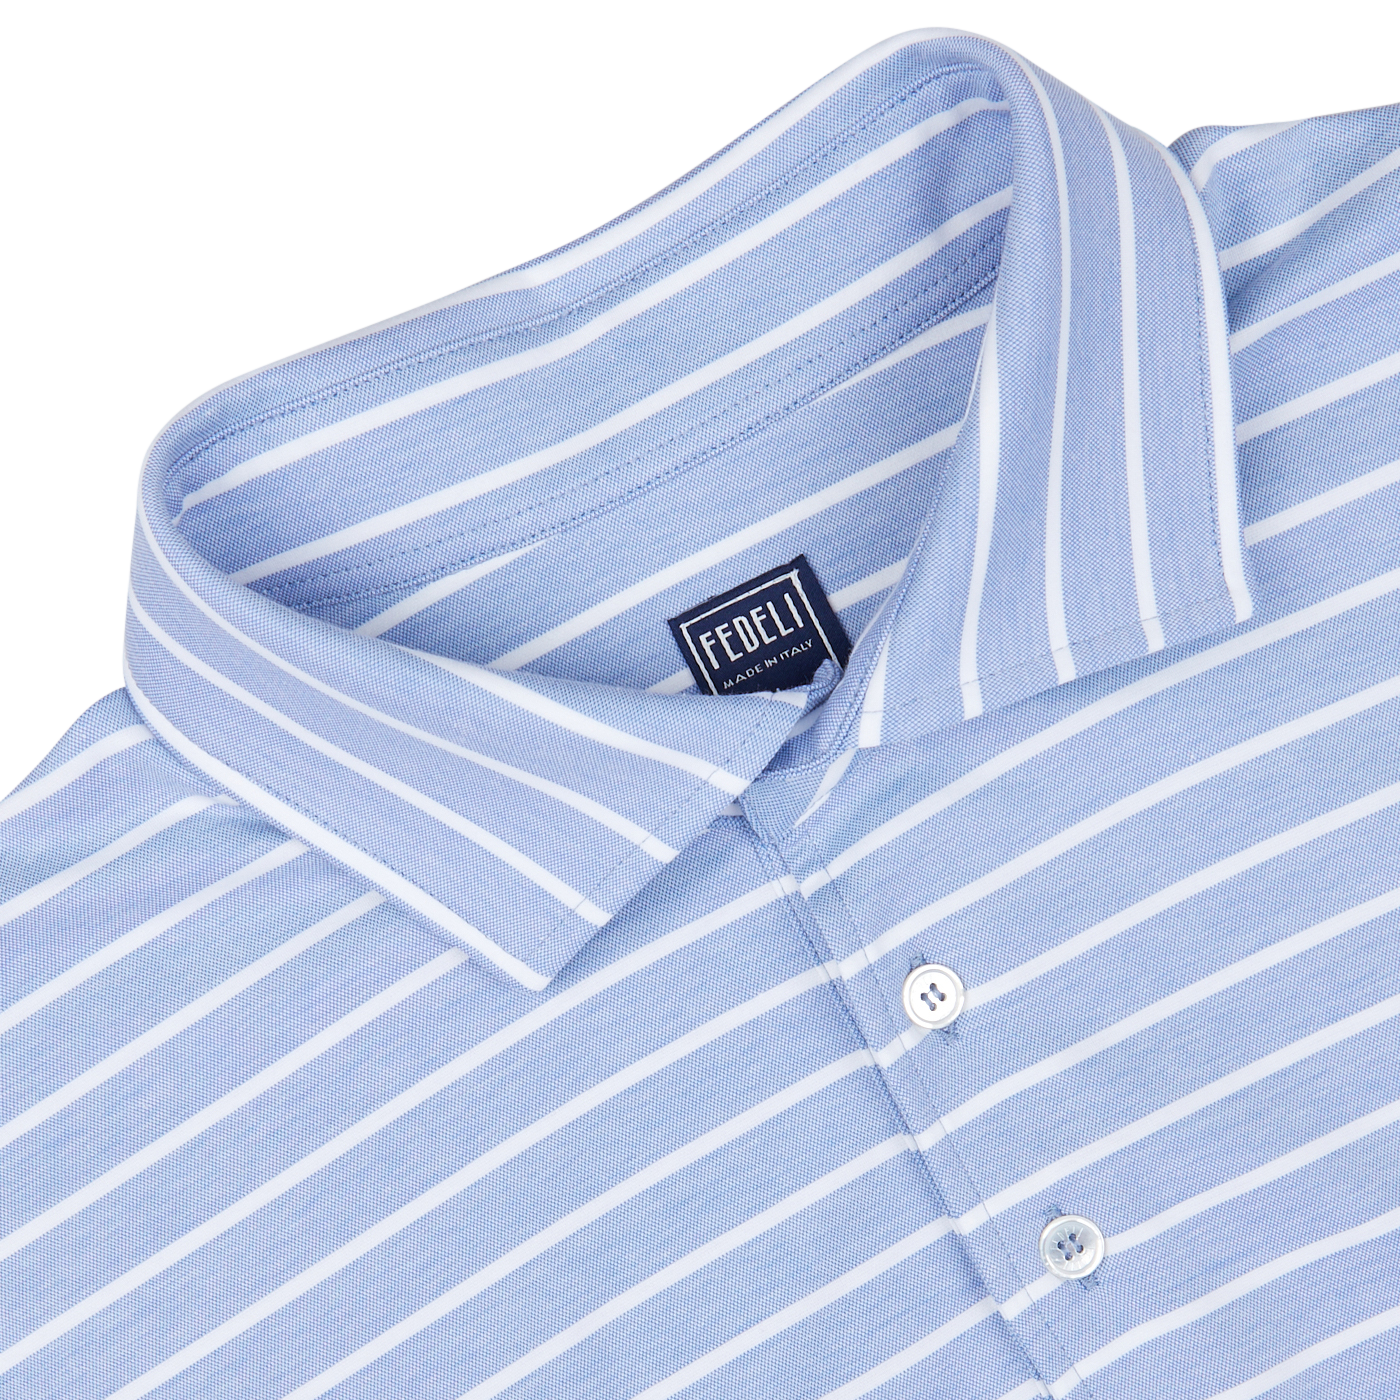 Close-up of a Fedeli Blue Wide Striped Cotton Jersey Polo Shirt with a collar label, made in Italy.